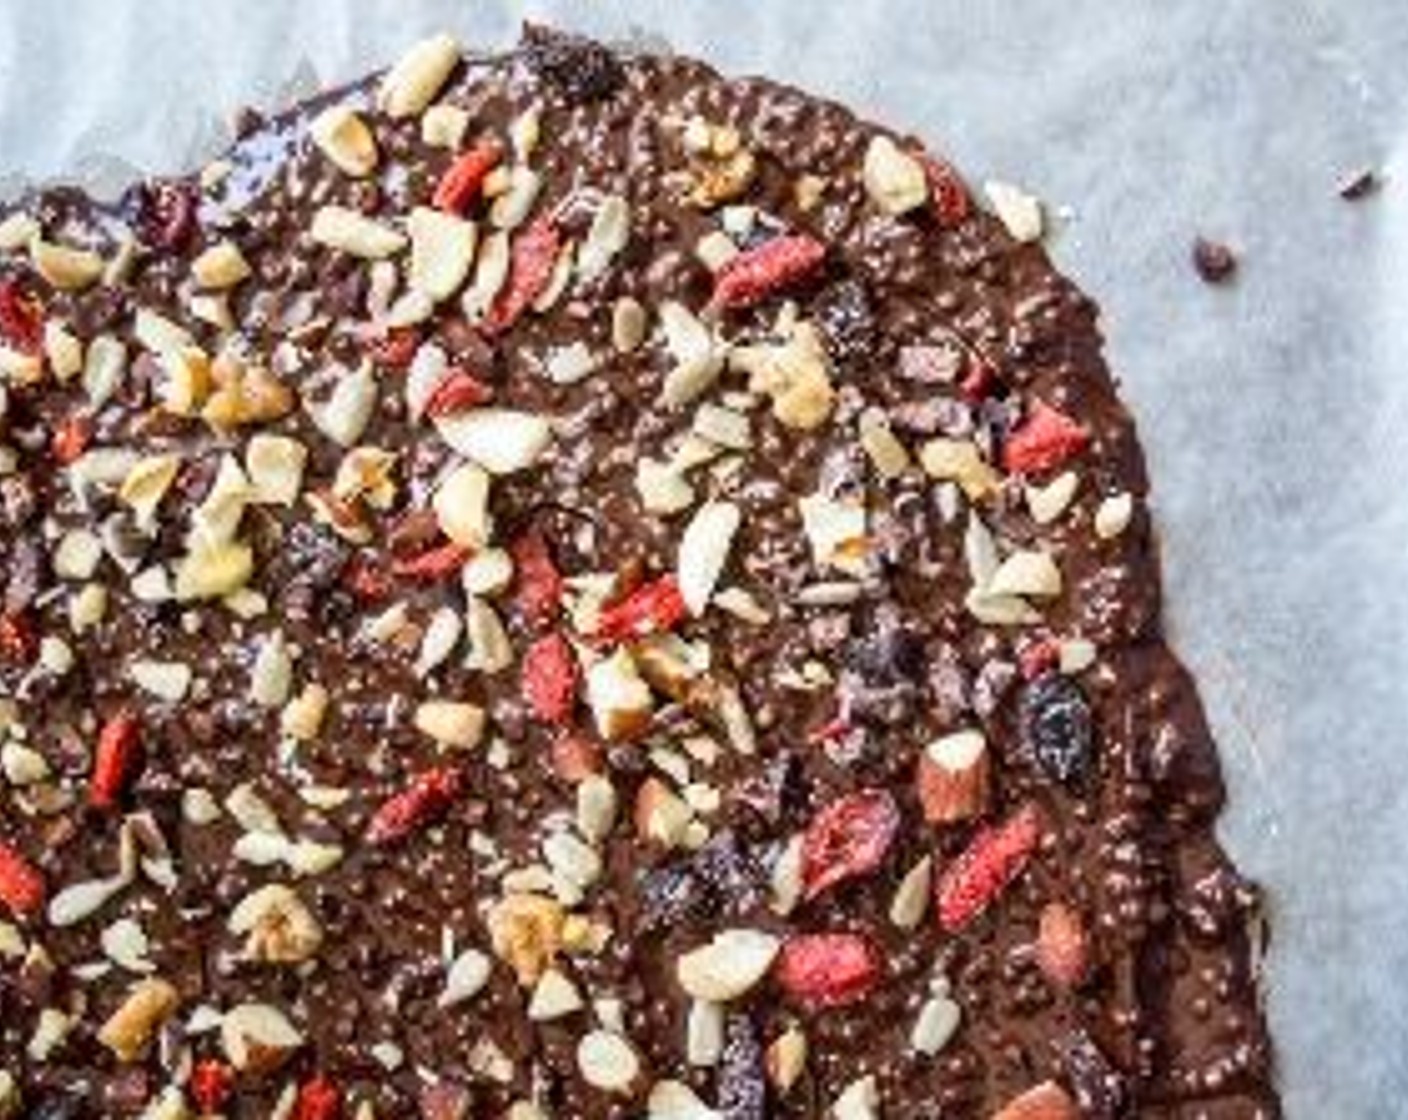 step 8 Add Goji Berry Trail Mix (1/3 cup), Cacao Nibs (2 Tbsp), and Walnut (1/4 cup), then press down lightly to mix toppings into chocolate. Put in freezer for 15-20 minutes, or until chocolate has hardened.